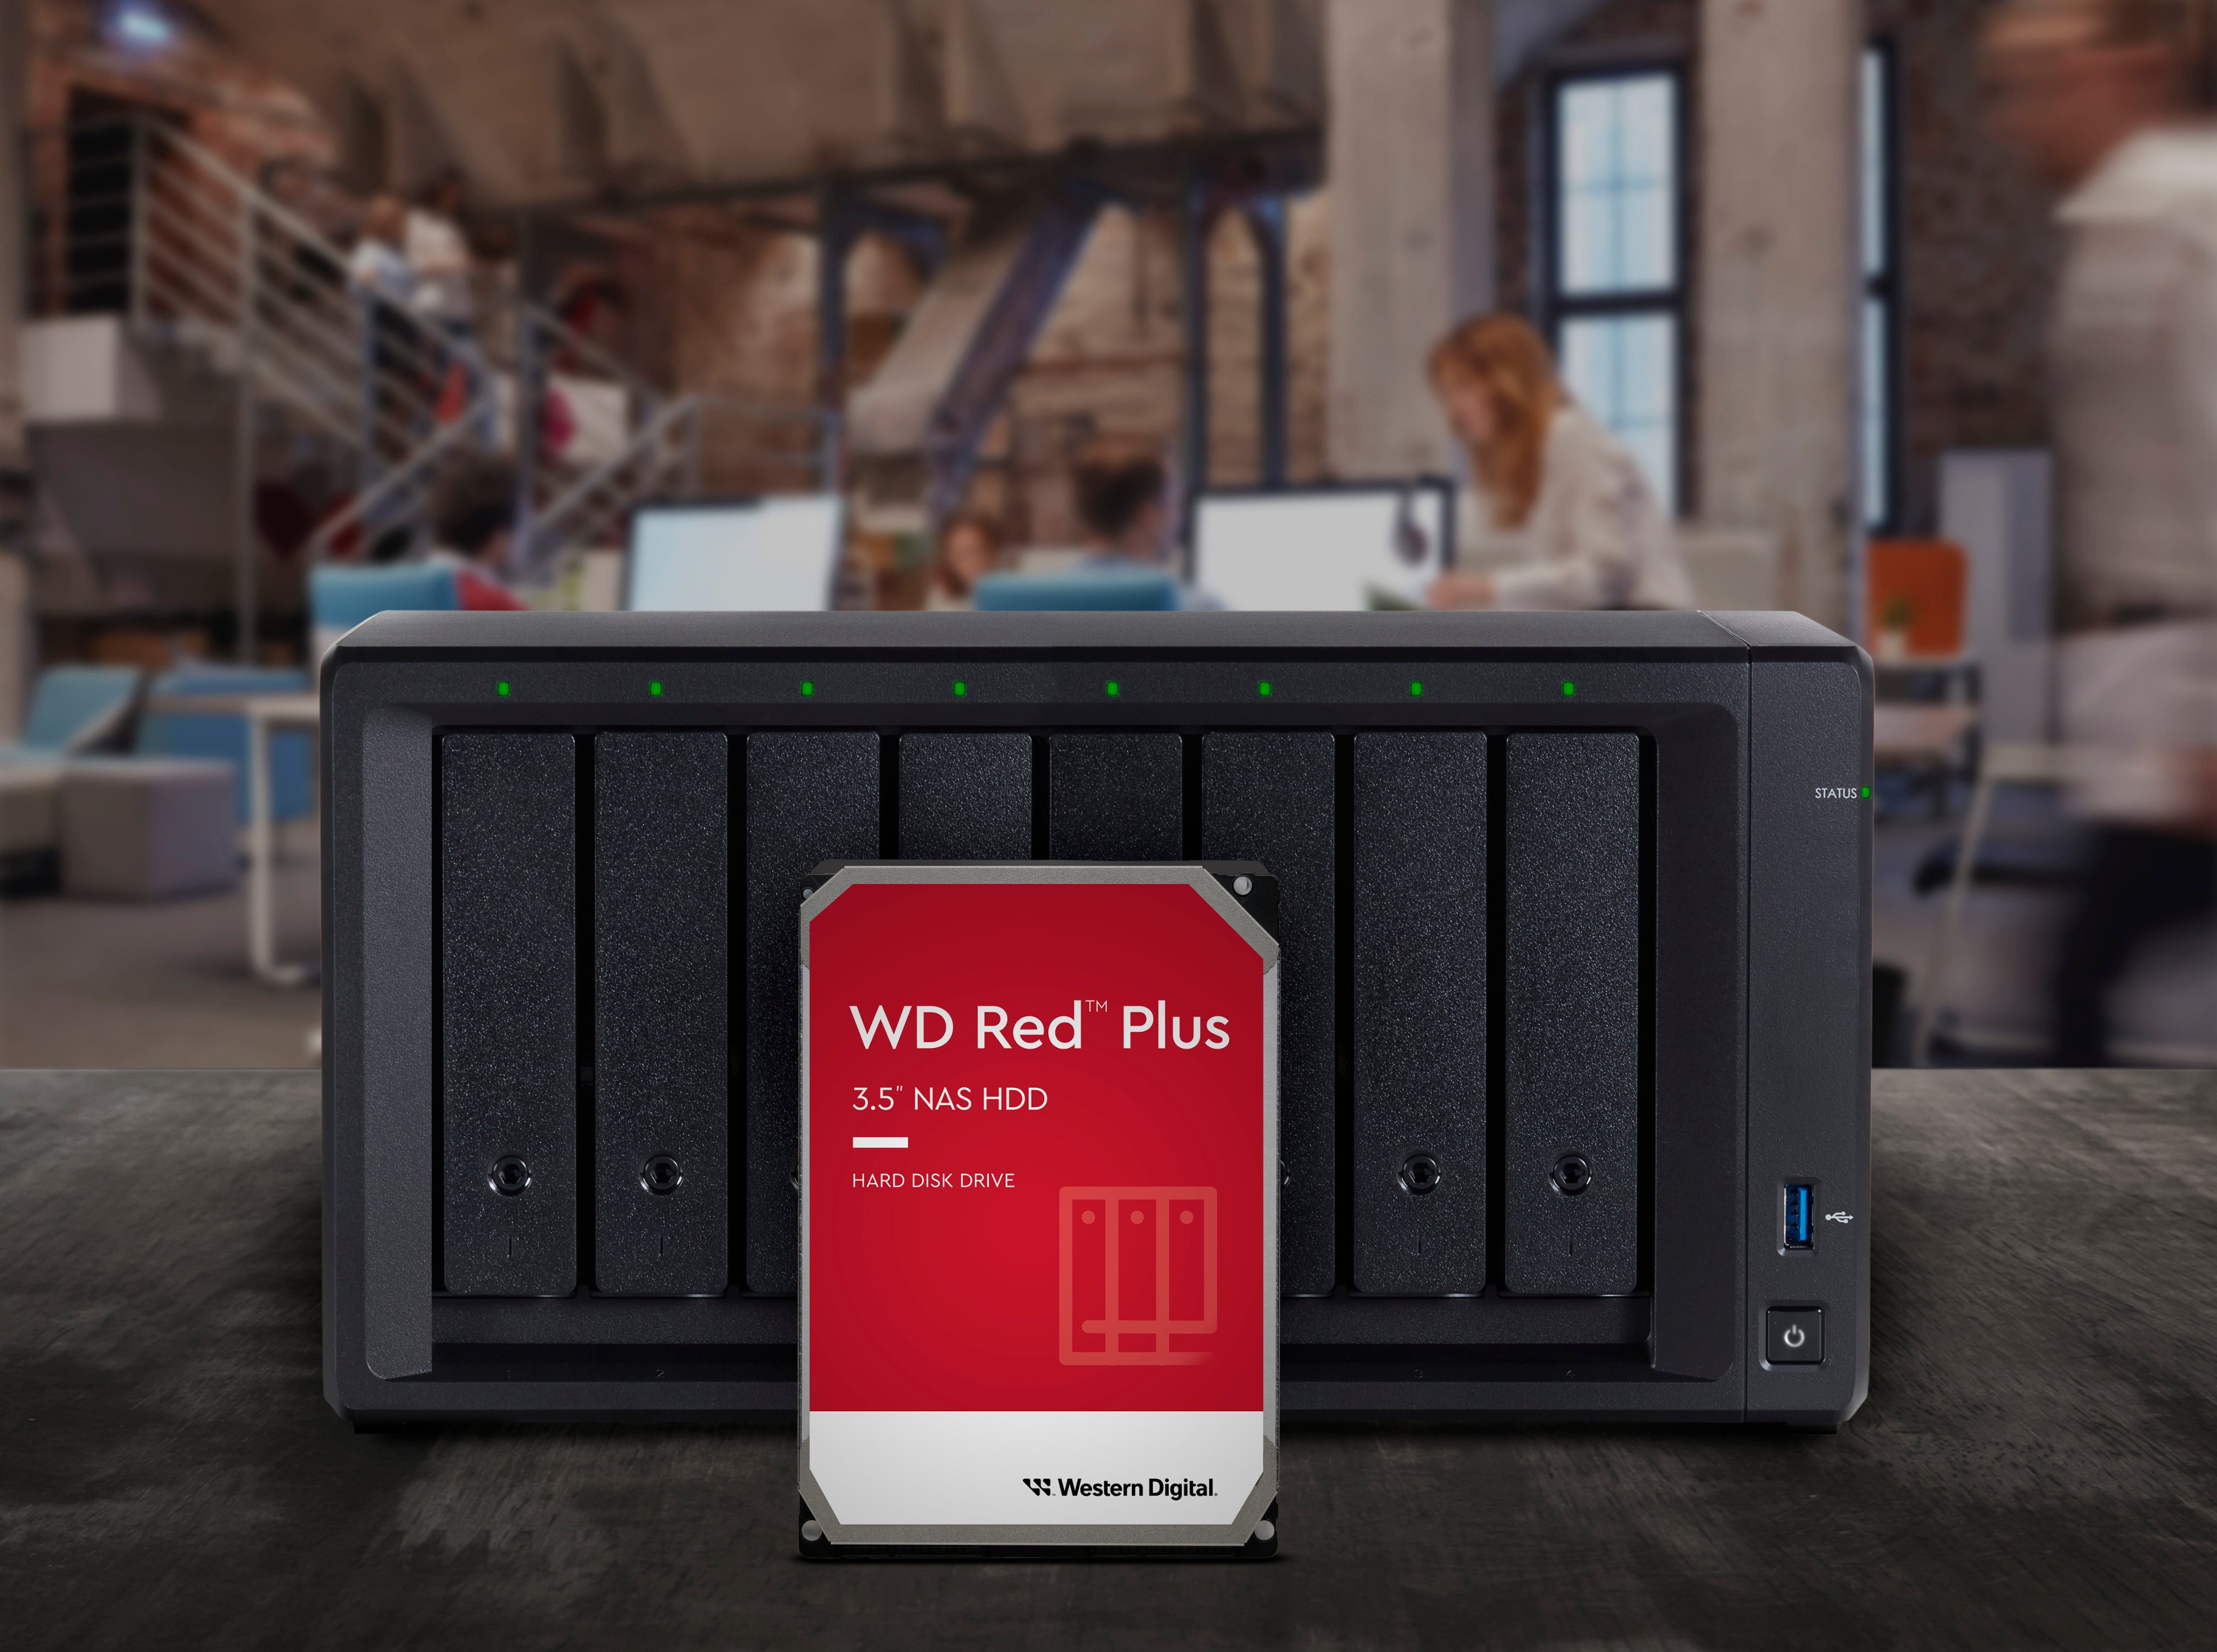 DISQUE DUR WESTERN DIGITAL WD RED PLUS 10 TO - MICROMEDIA